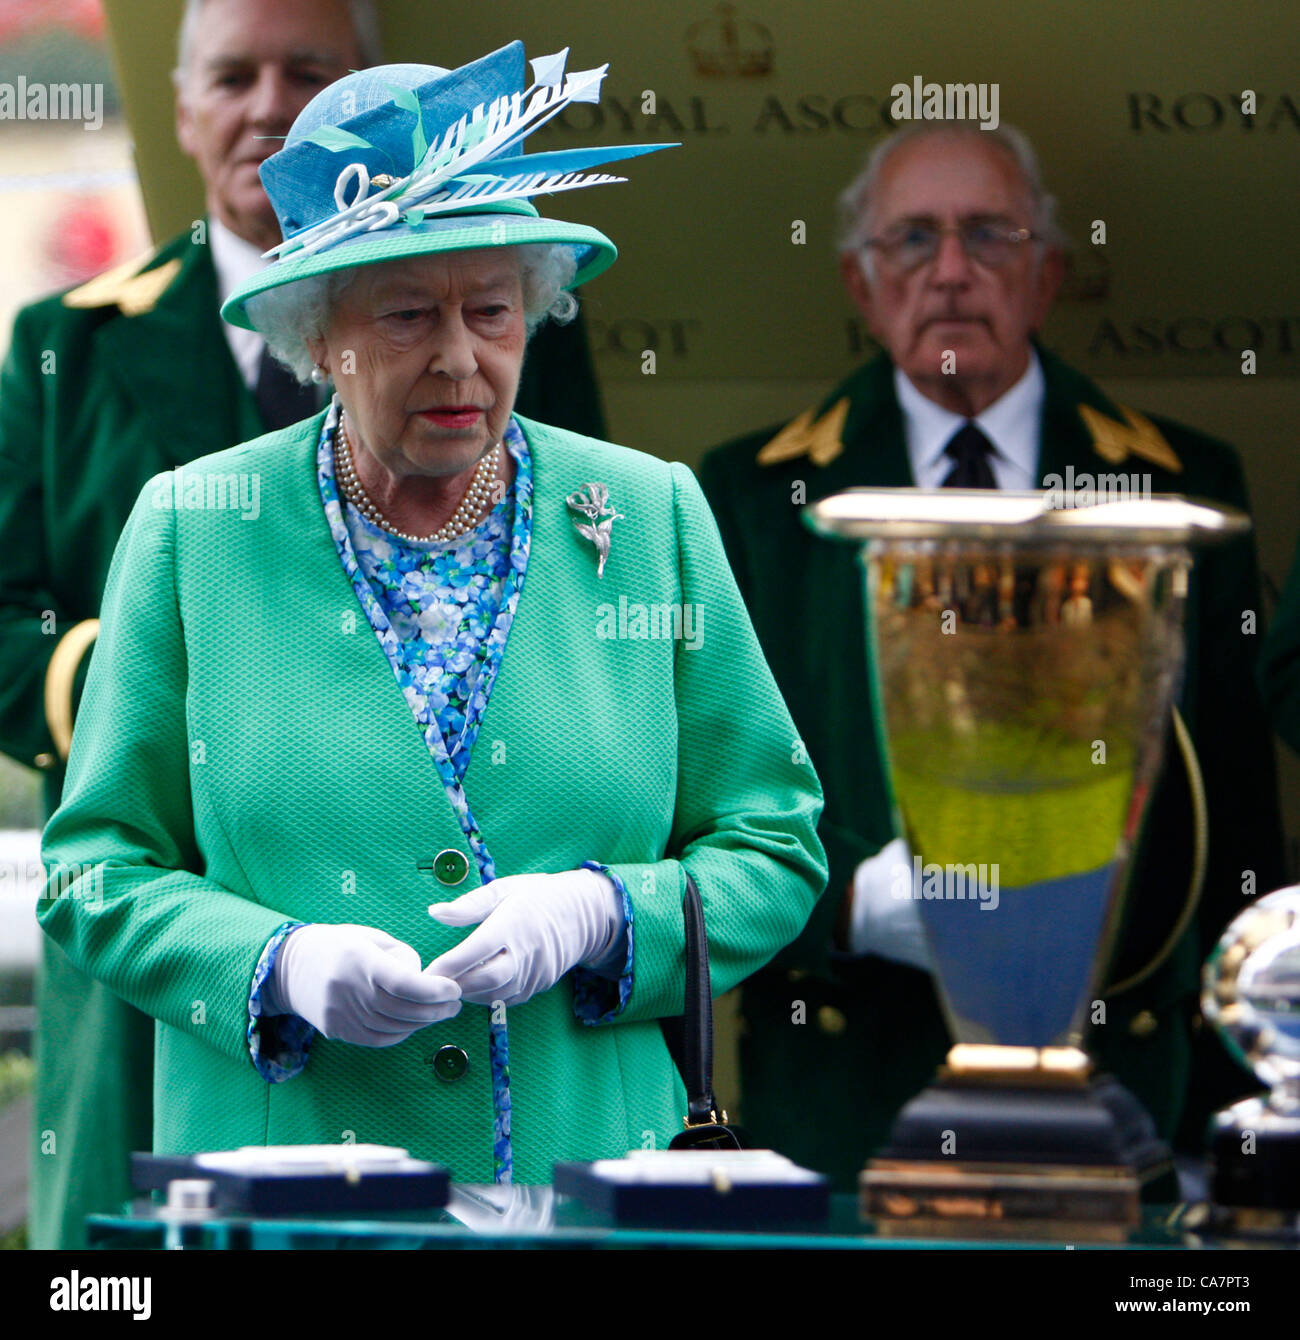 23.06.2012 Ascot, Windsor, ENGLAND, UK:  Queen Elizabeth II with The Diamond Jubilee Stakes trophy during Royal Ascot Festival at Ascot racecourse. Stock Photo